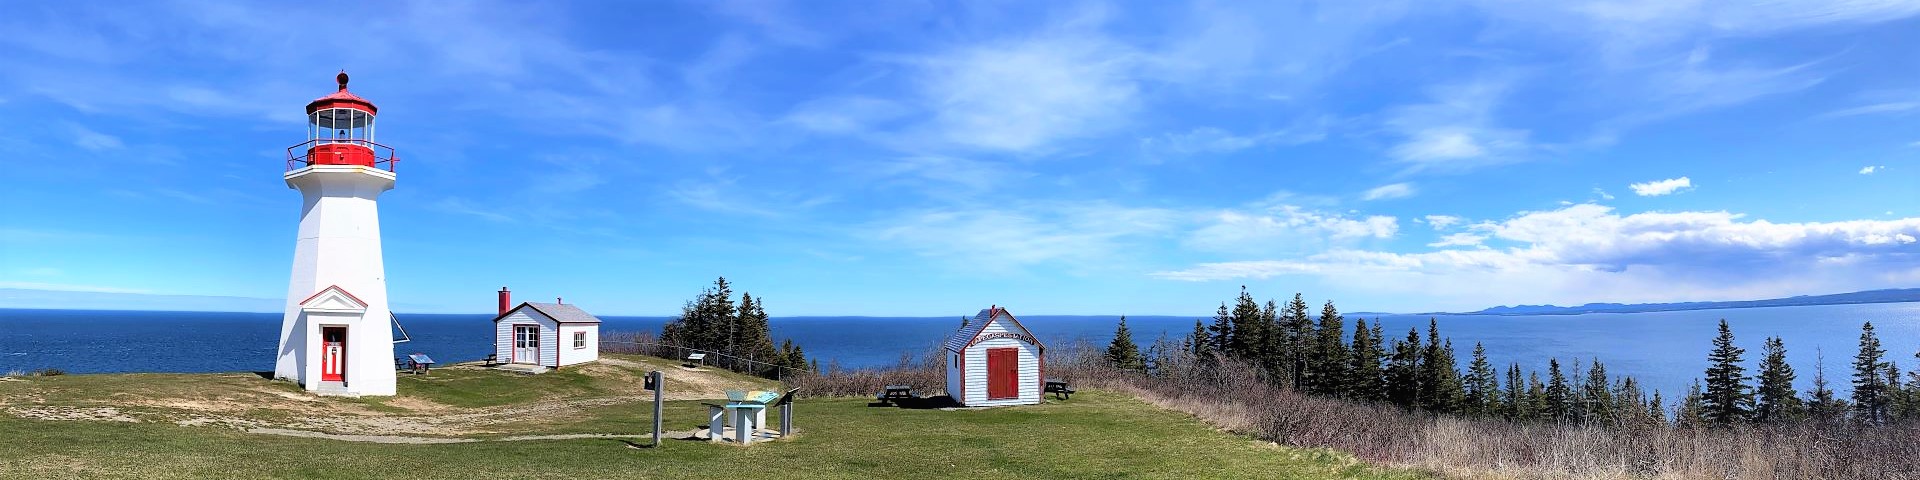 Panoramic view of a lighthouse and buildings.